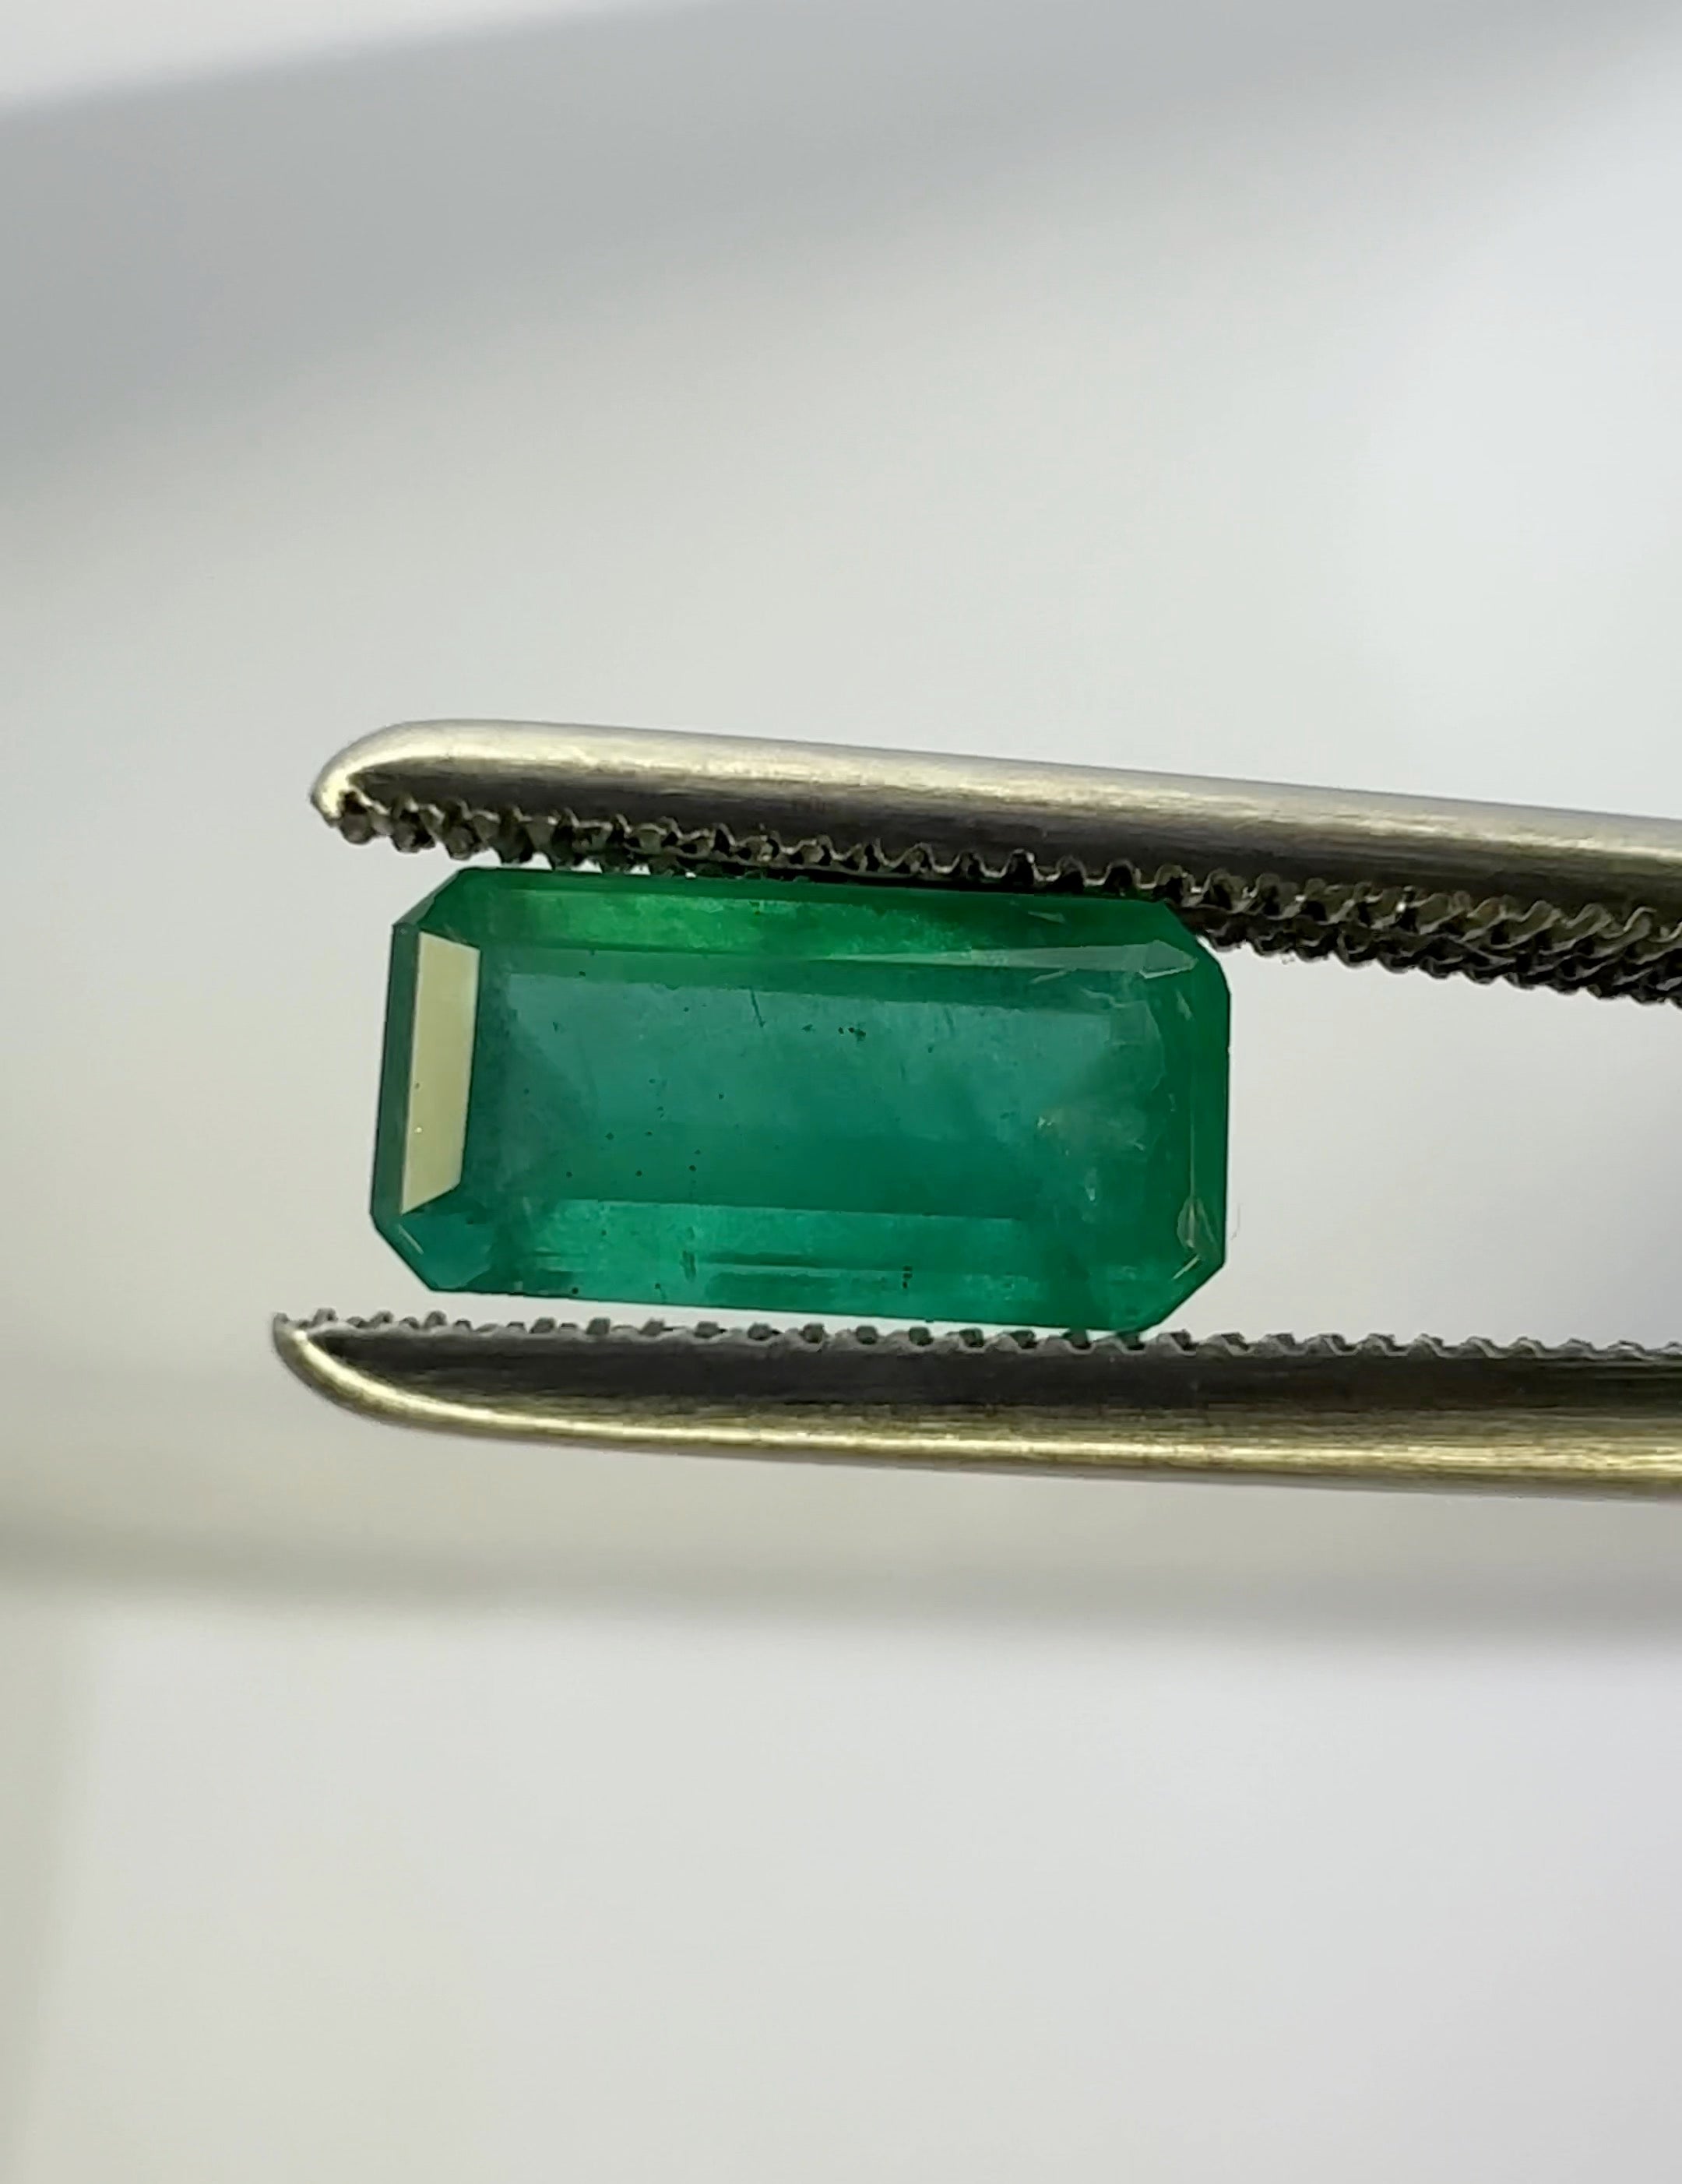 1.09Ct Emerald Tanzania No Oil Untreated Unheated. Photos And Vids In Different Lights See How It